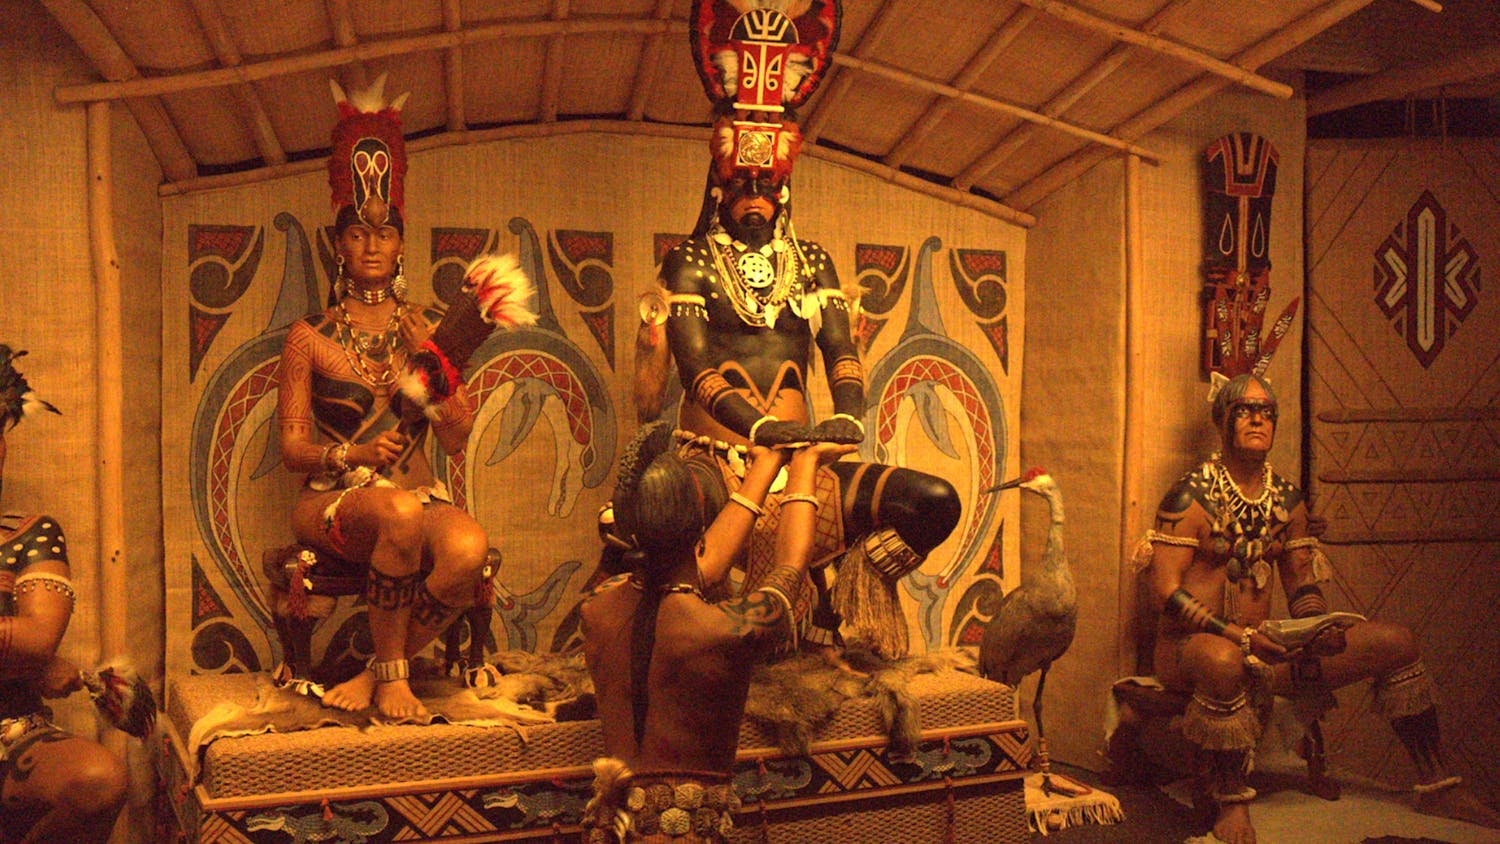 Statues of the Calusa Indians sit inside a hut as part of the “South Florida Peoples and Their Environment” exhibit at the Florida Museum of Natural History on Thursday, Oct. 19, 2023.
